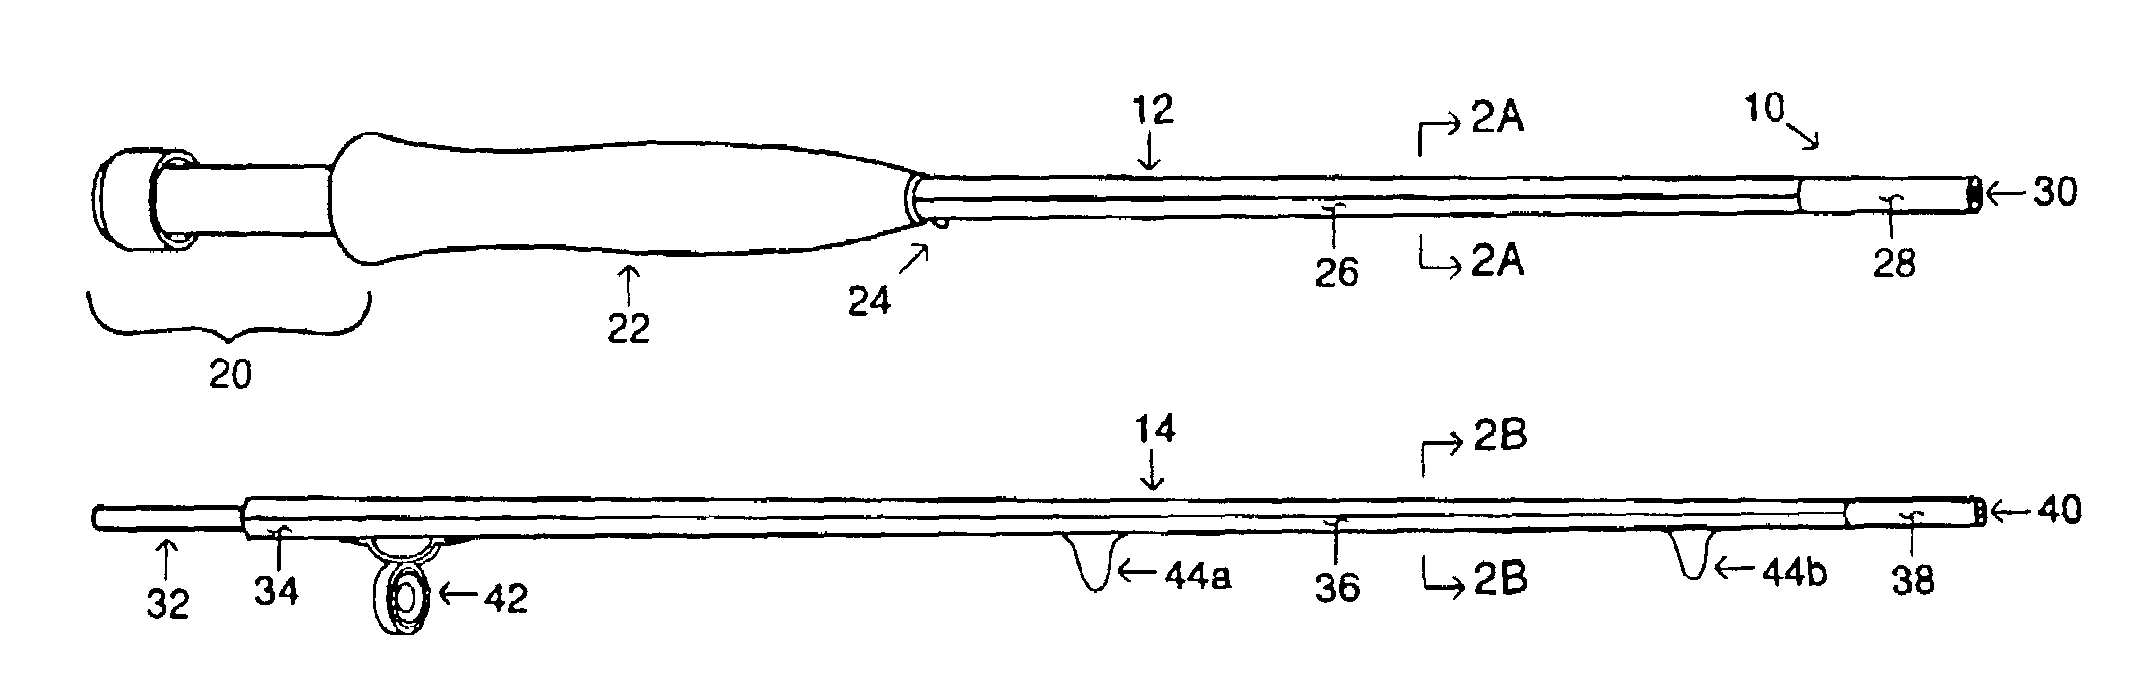 One piece polygonal carbon fiber rod with integral spine